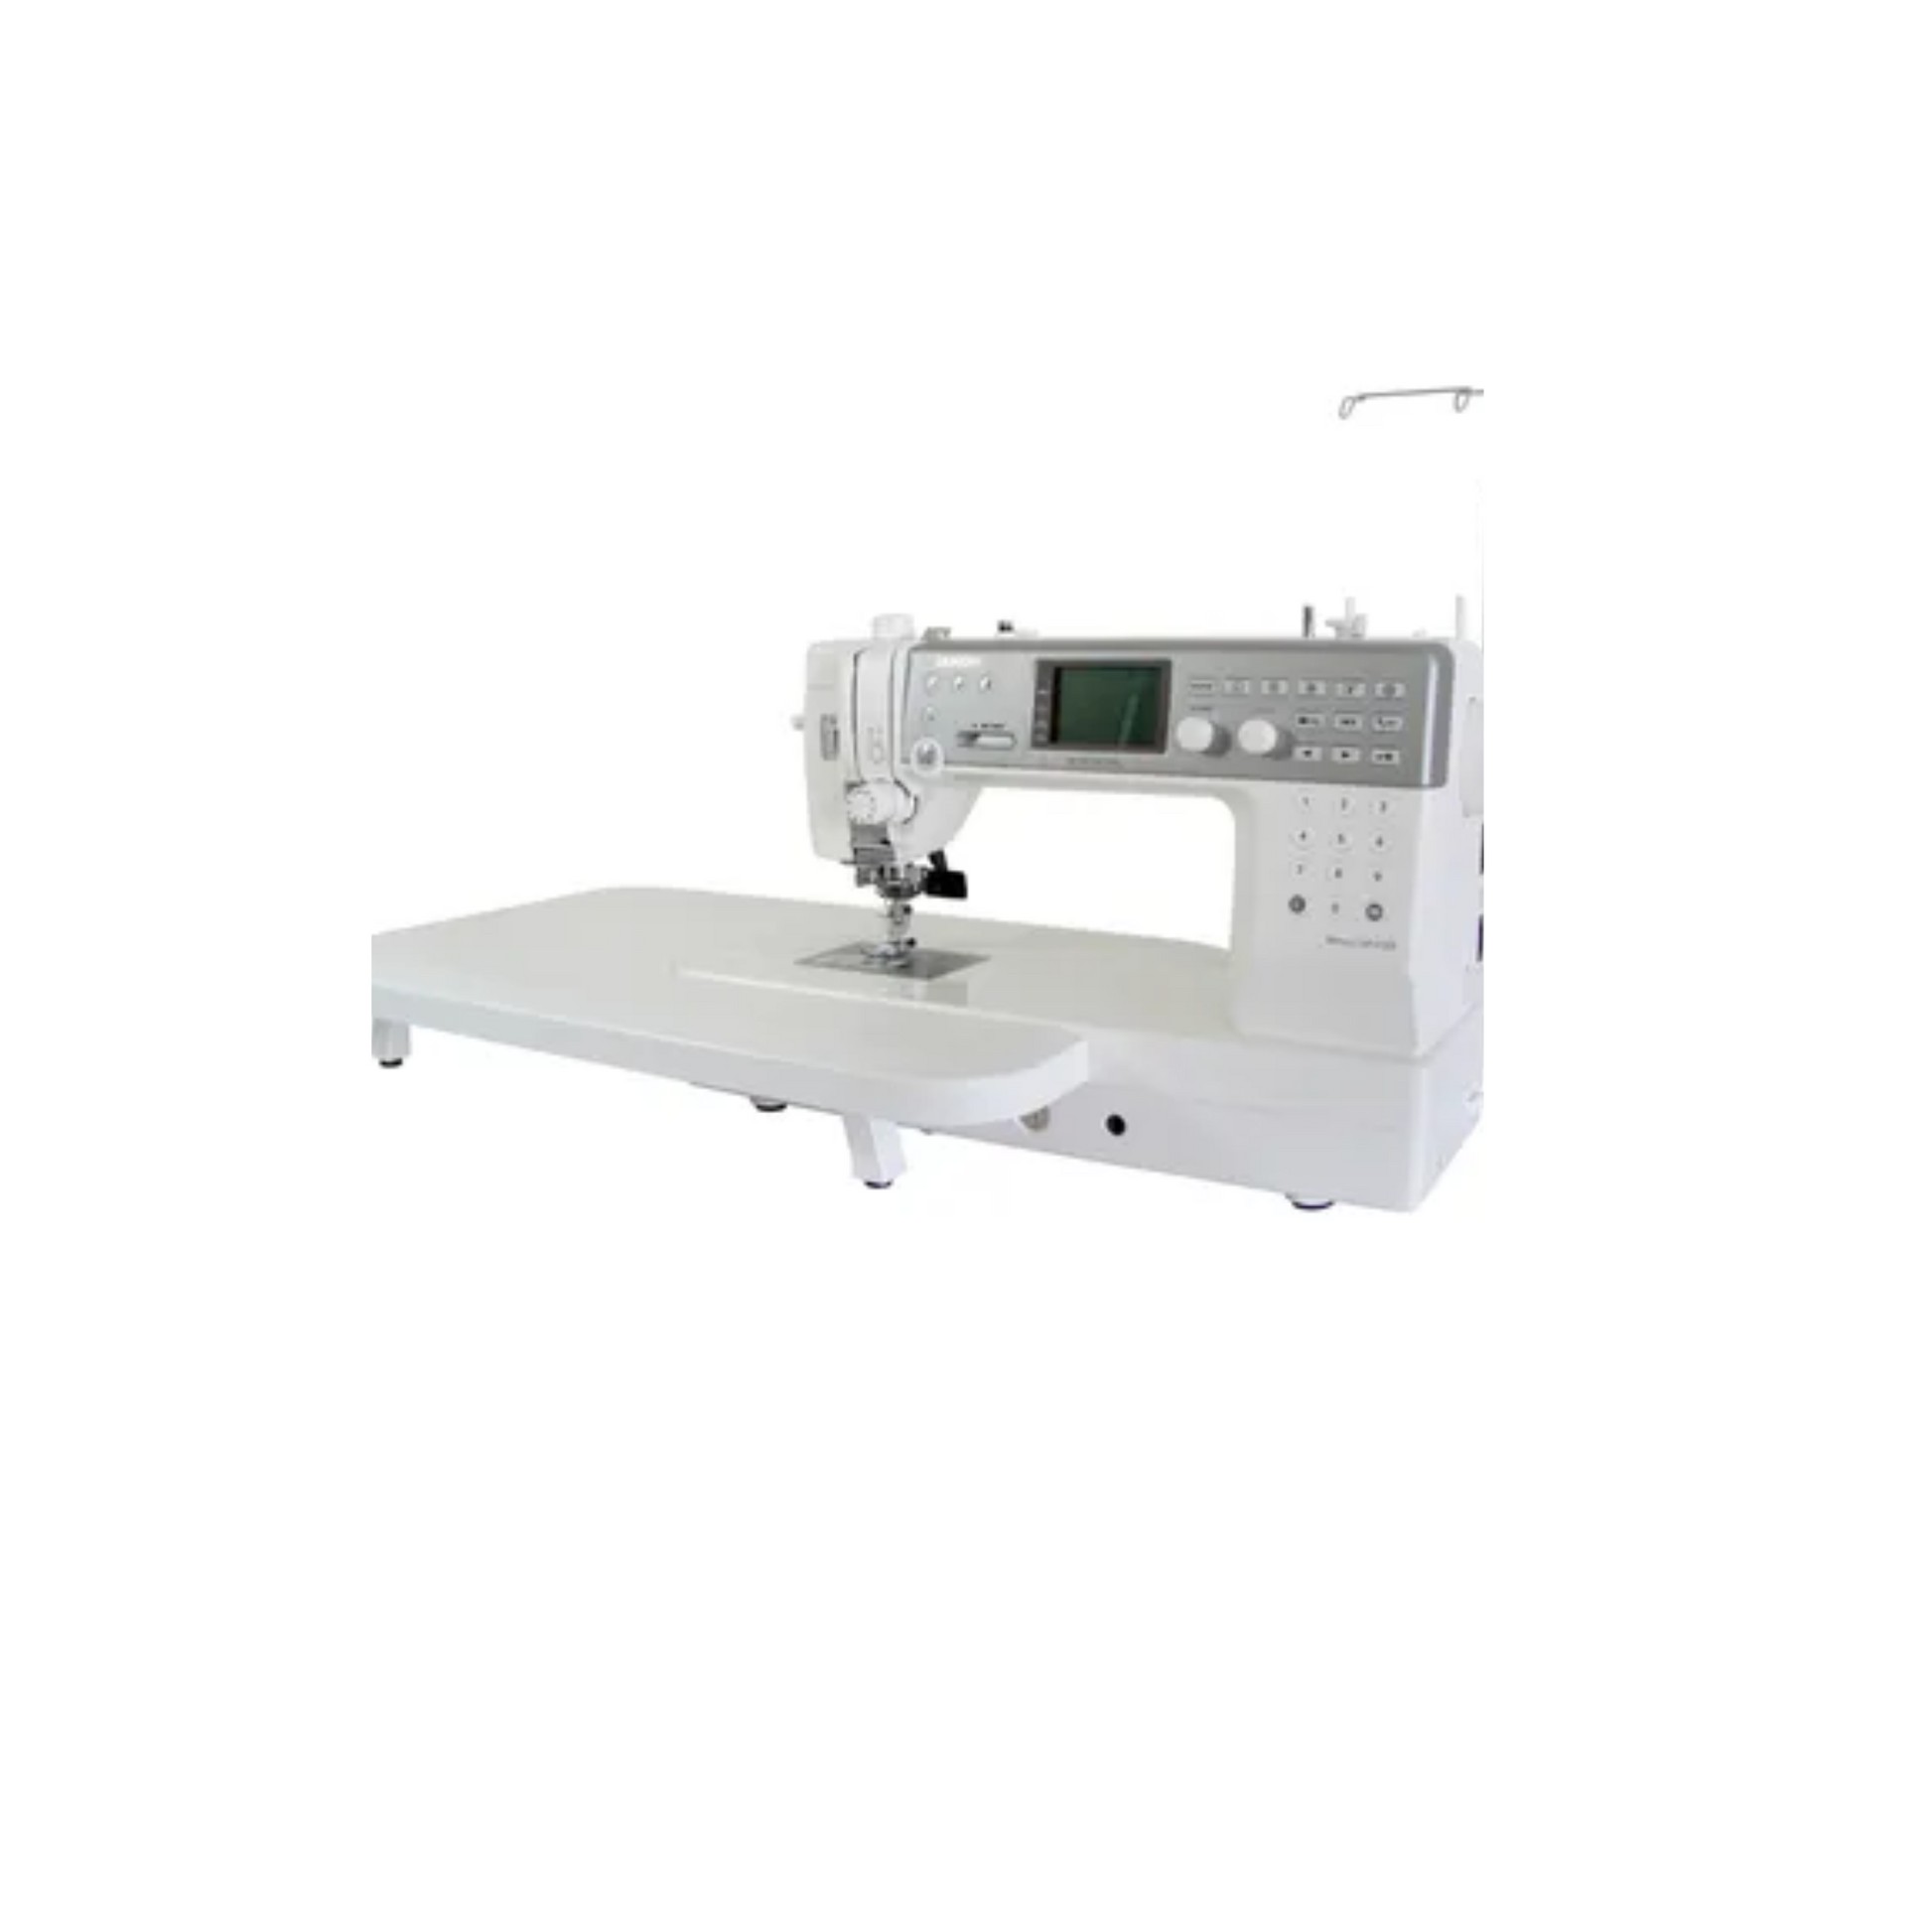 Janome memory craft 6700p - Sewing machine - White - Side view